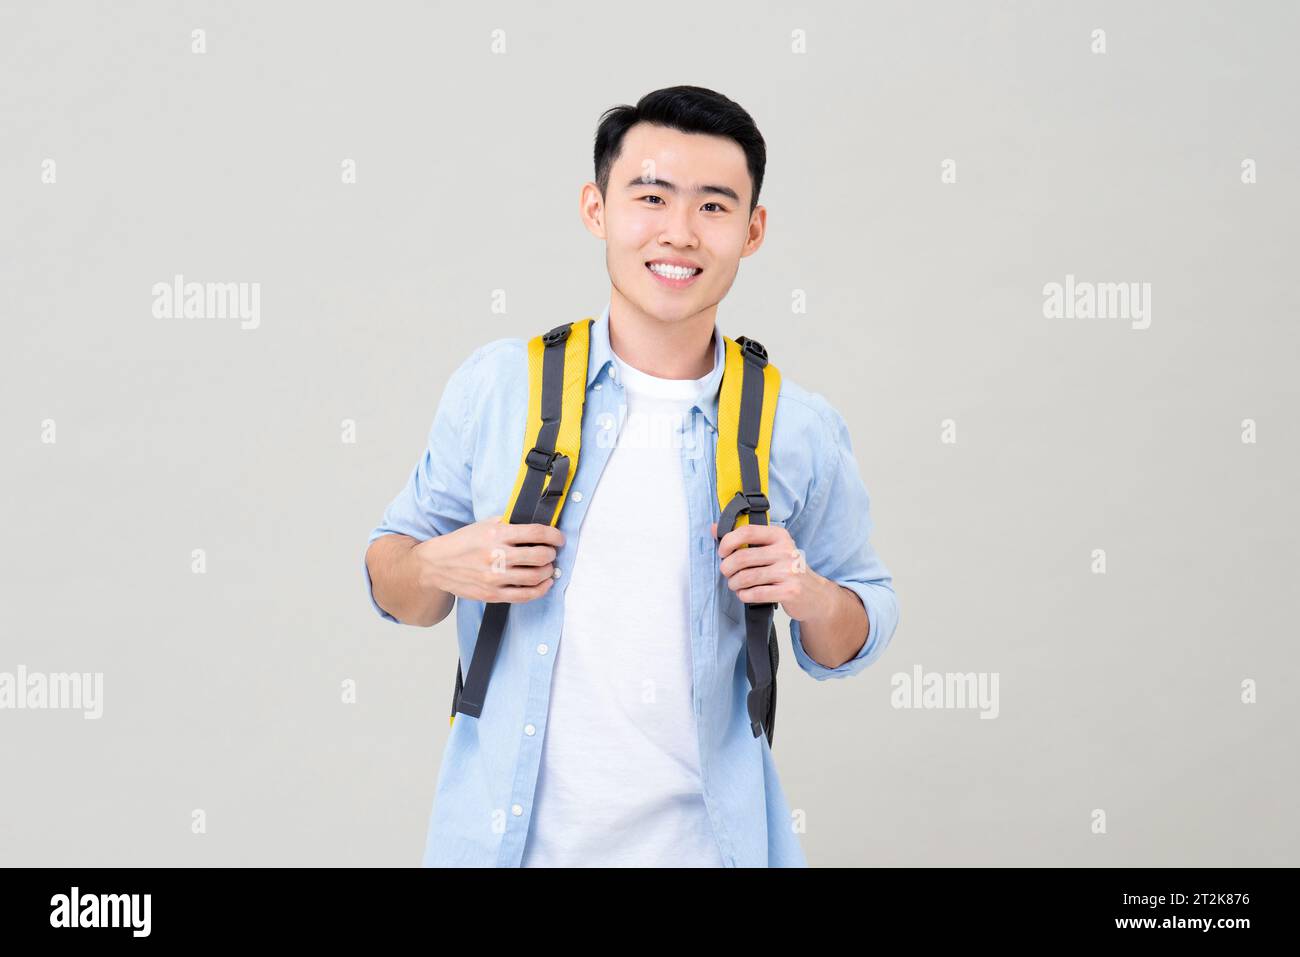 Porttrait of young smiling Asian tourist man with backpack studio shot isolated in gray background Stock Photo